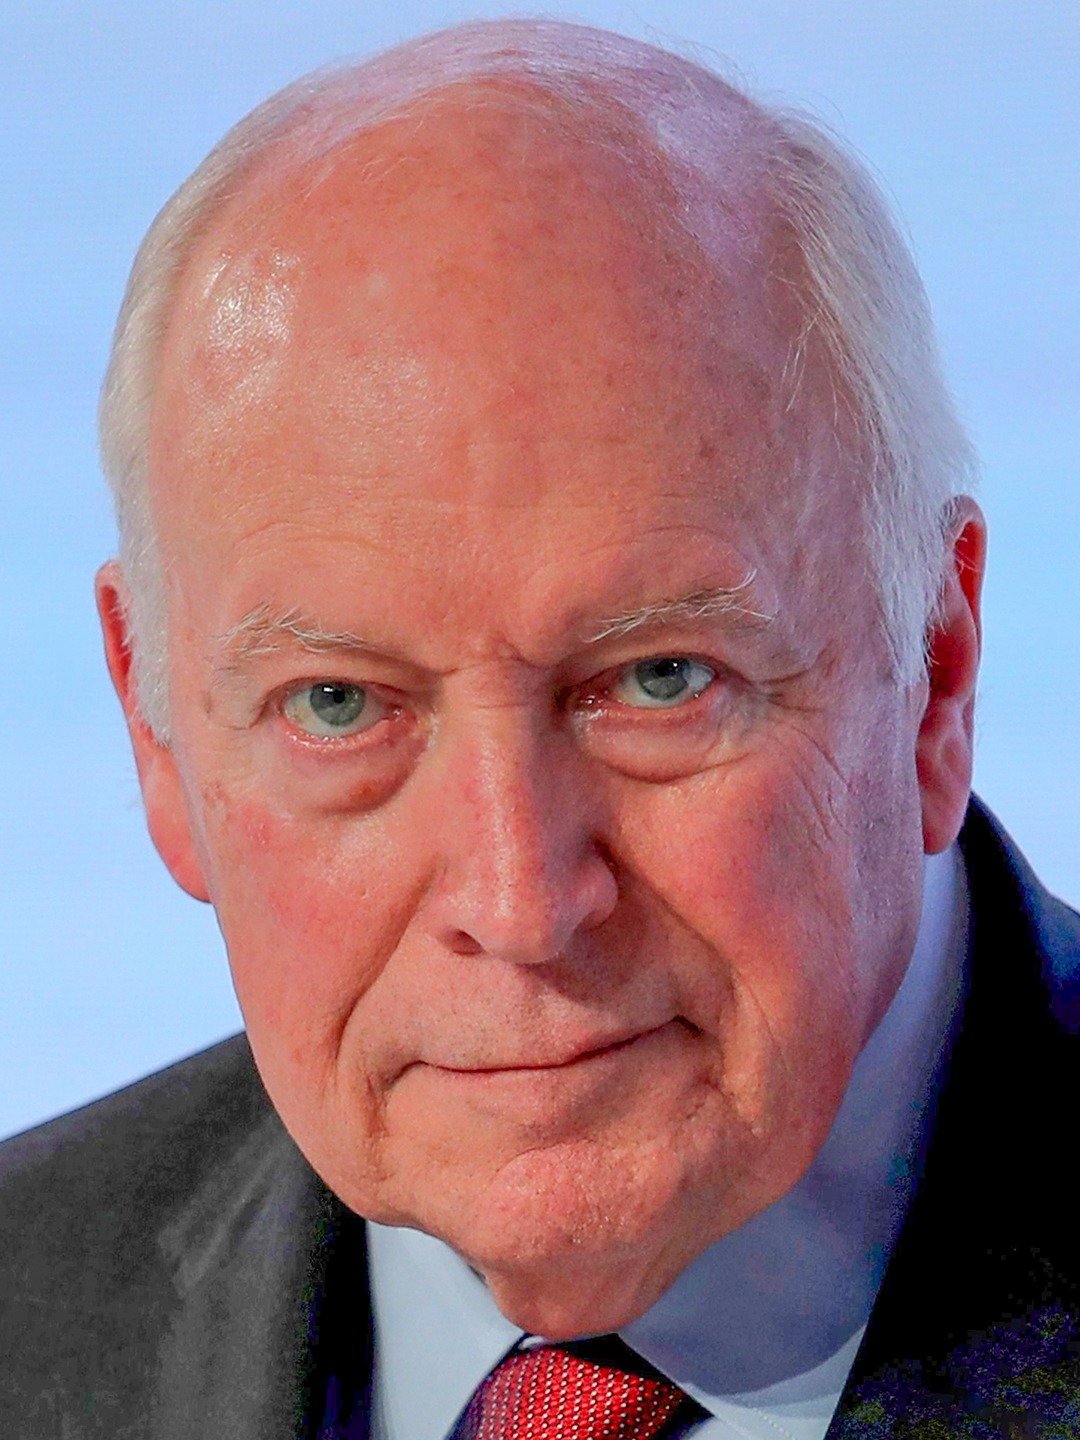 Dick Cheney picture photo image